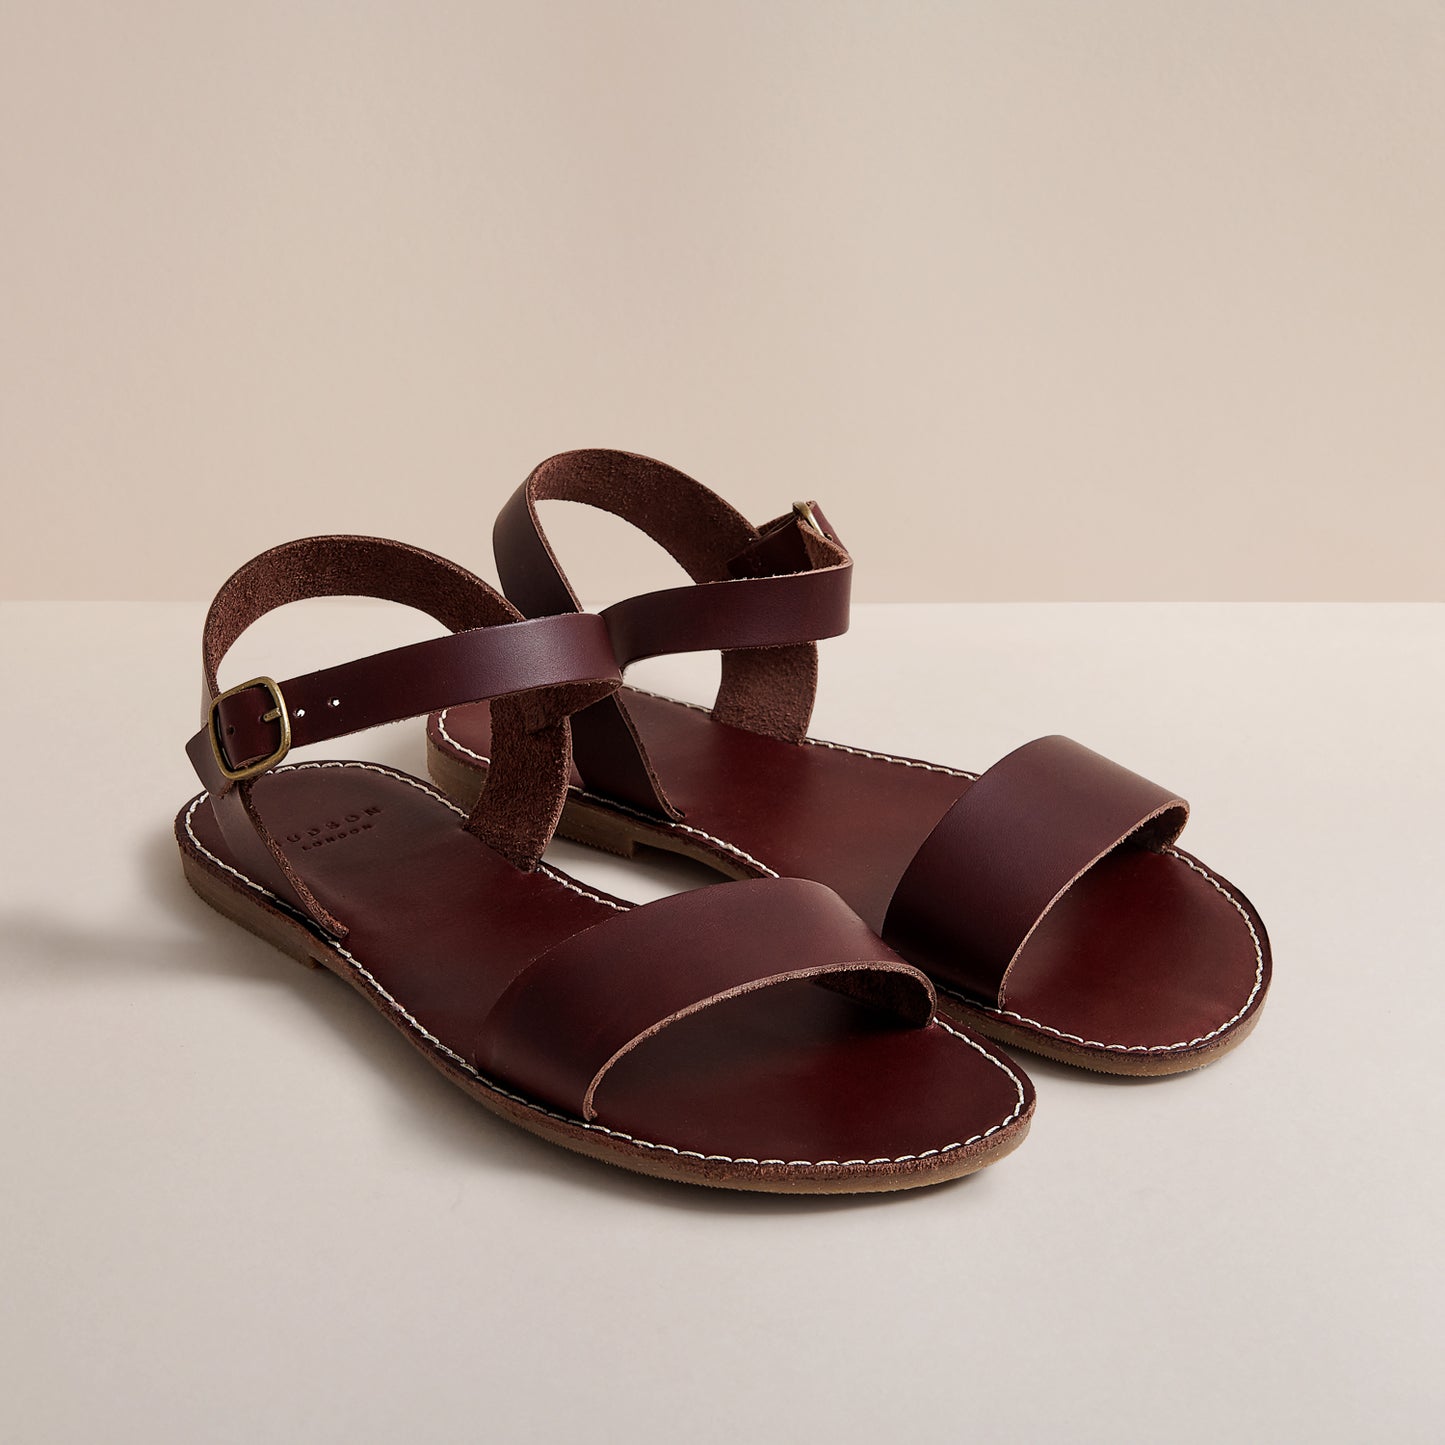 ROSEMARY BROWN LEATHER SANDAL